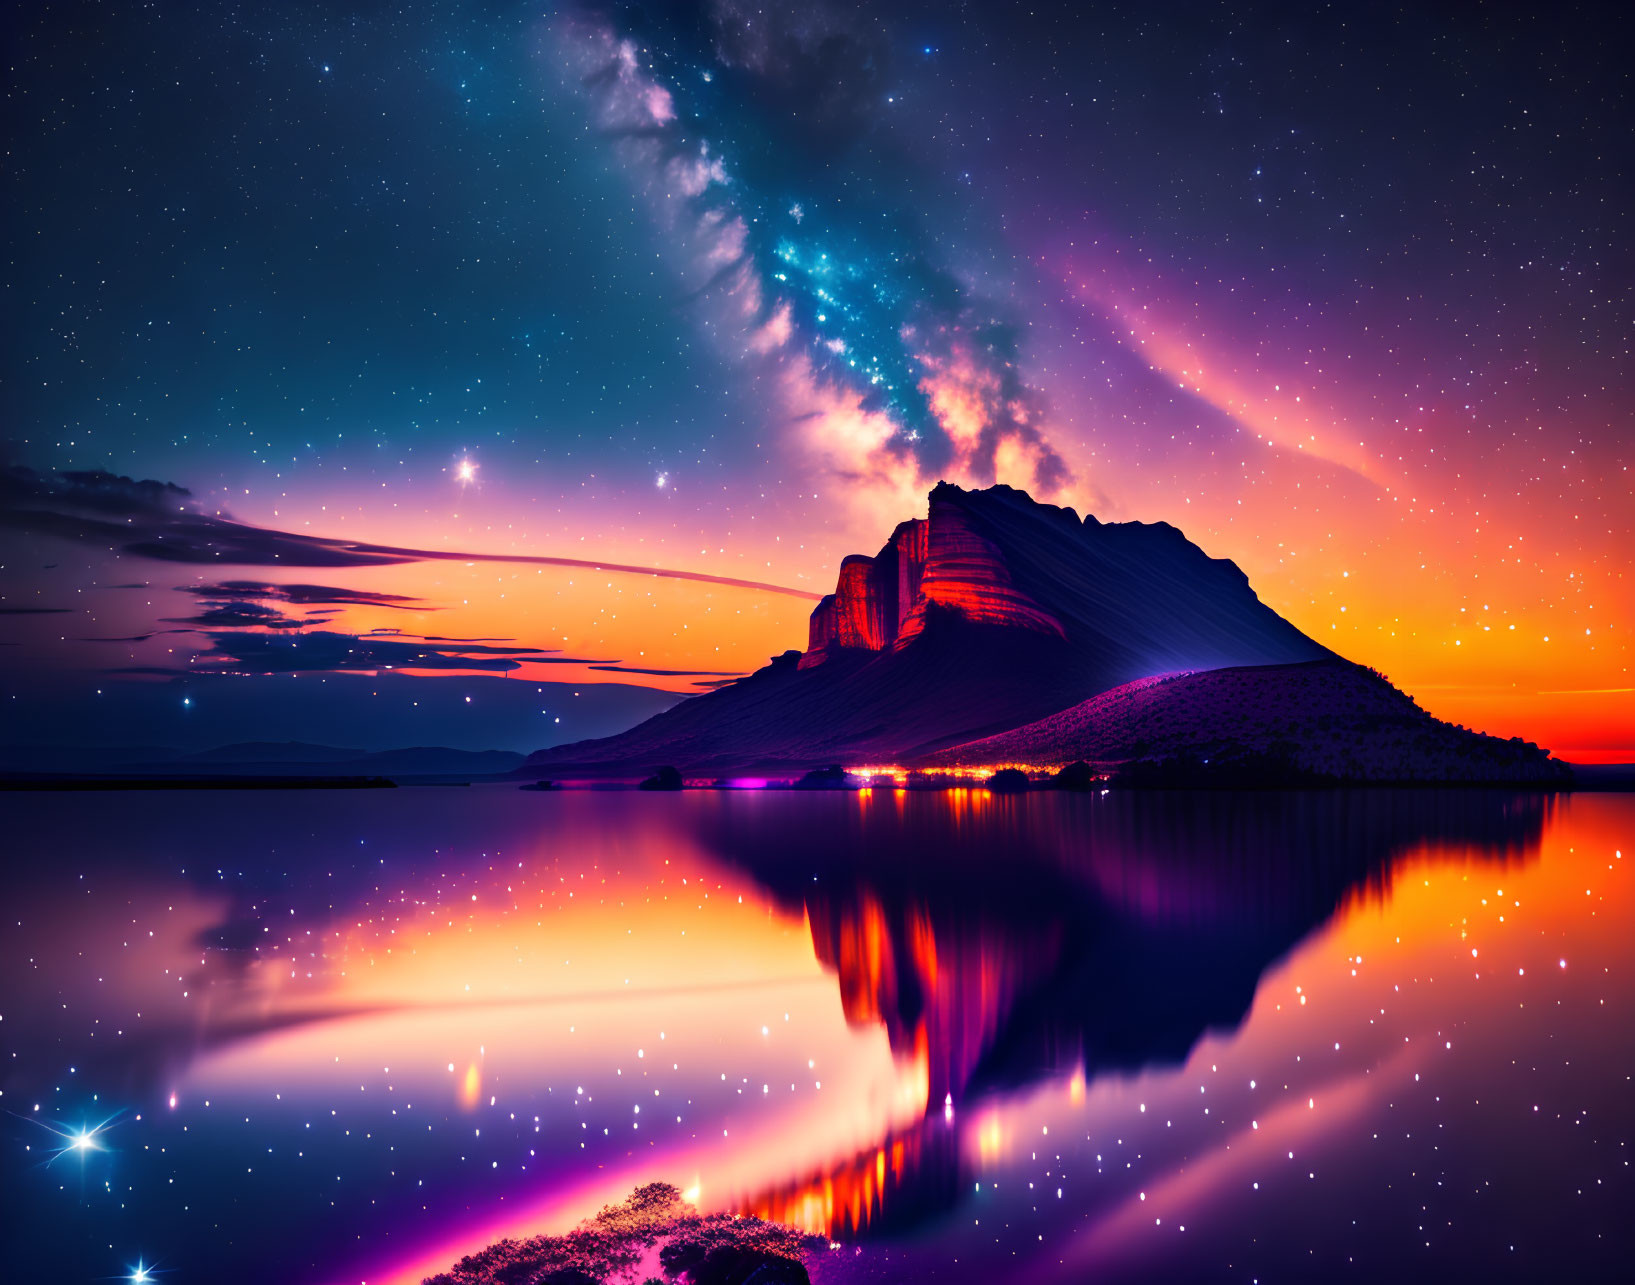 Mountain Reflection in Tranquil Water Beneath Purple Starry Sky